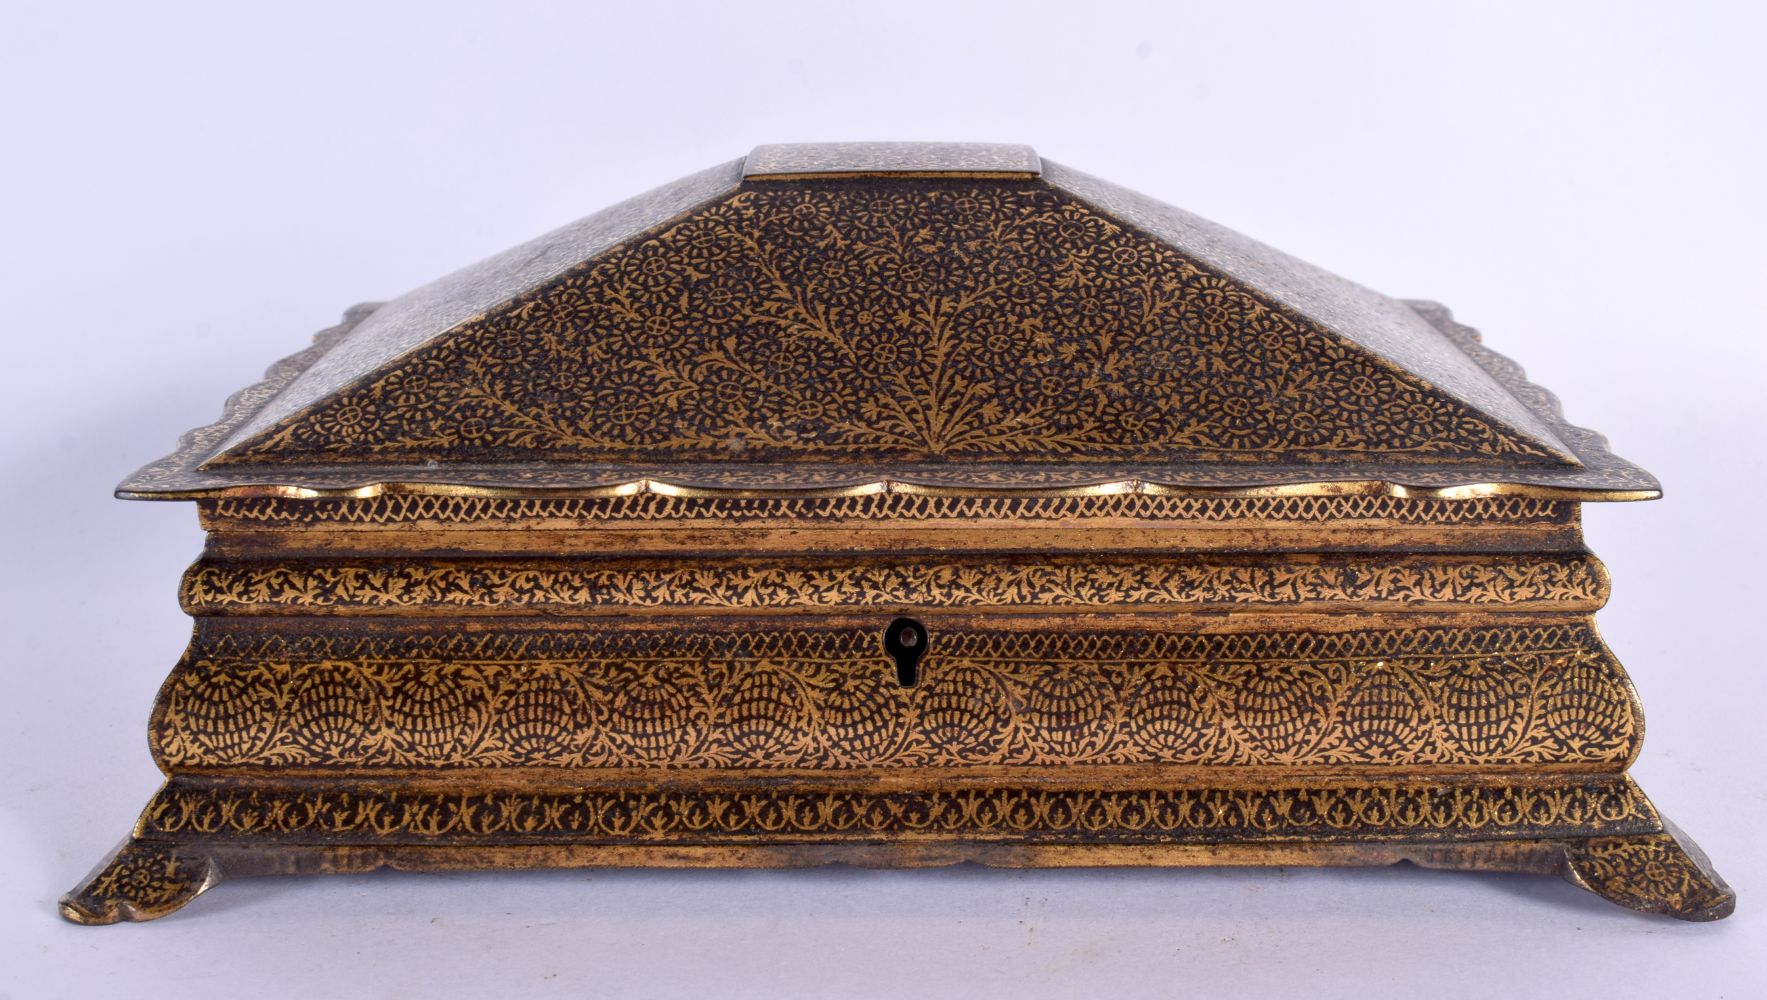 A RARE 19TH CENTURY PERSIAN TURKISH GOLD INLAID STEEL CASKET decorated all over with foliage and vin